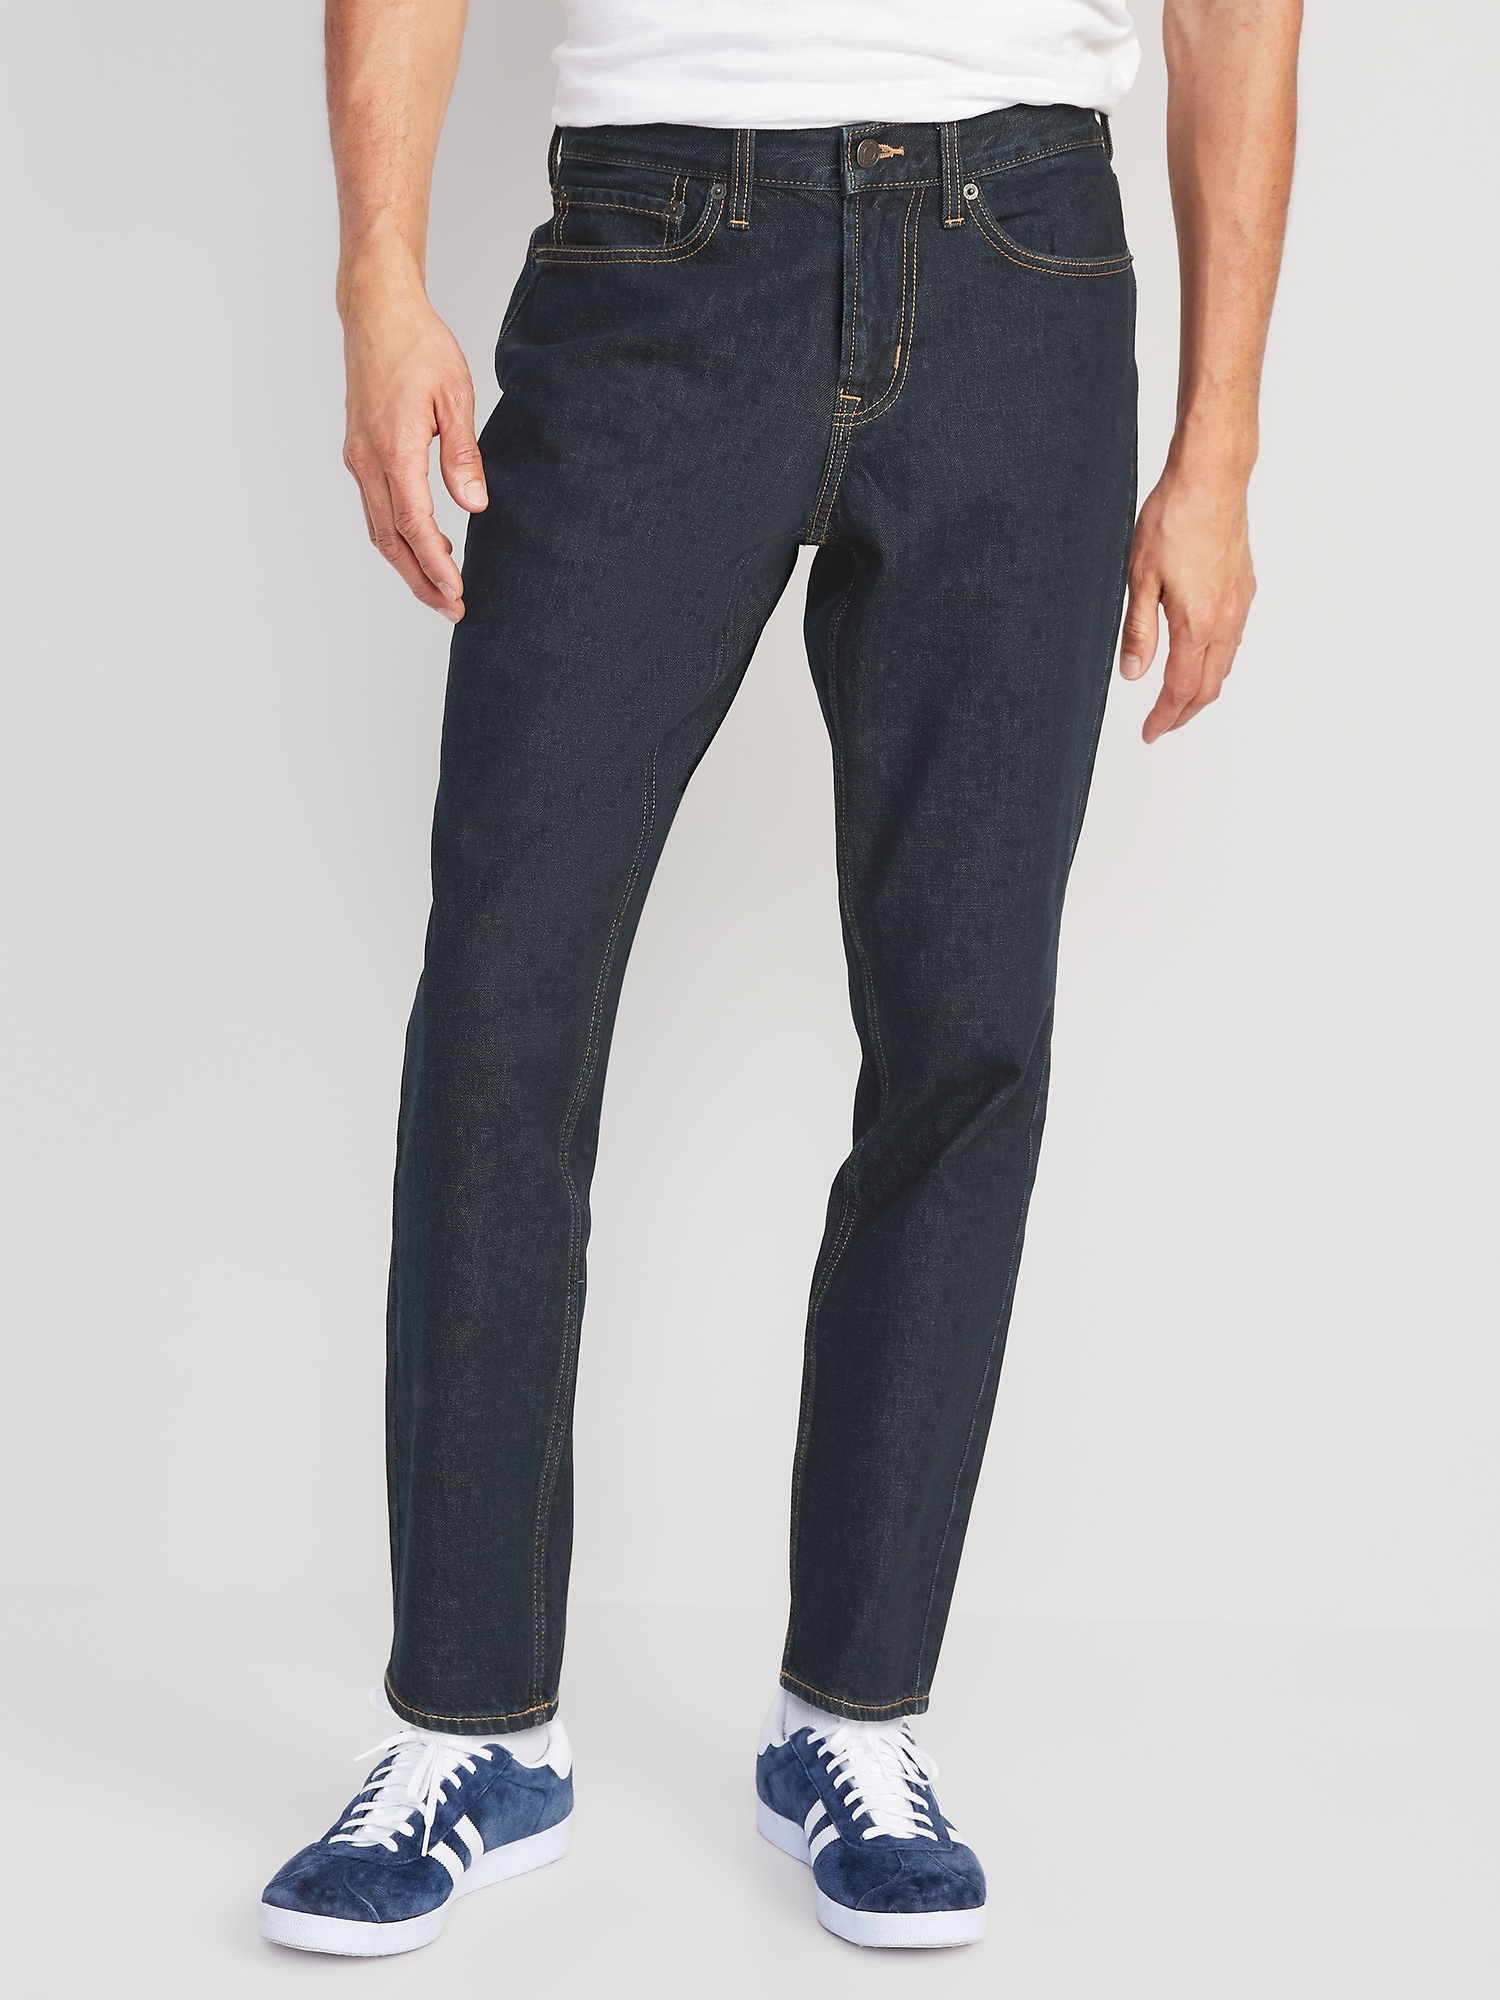 Wow Athletic Taper Non-Stretch Jeans